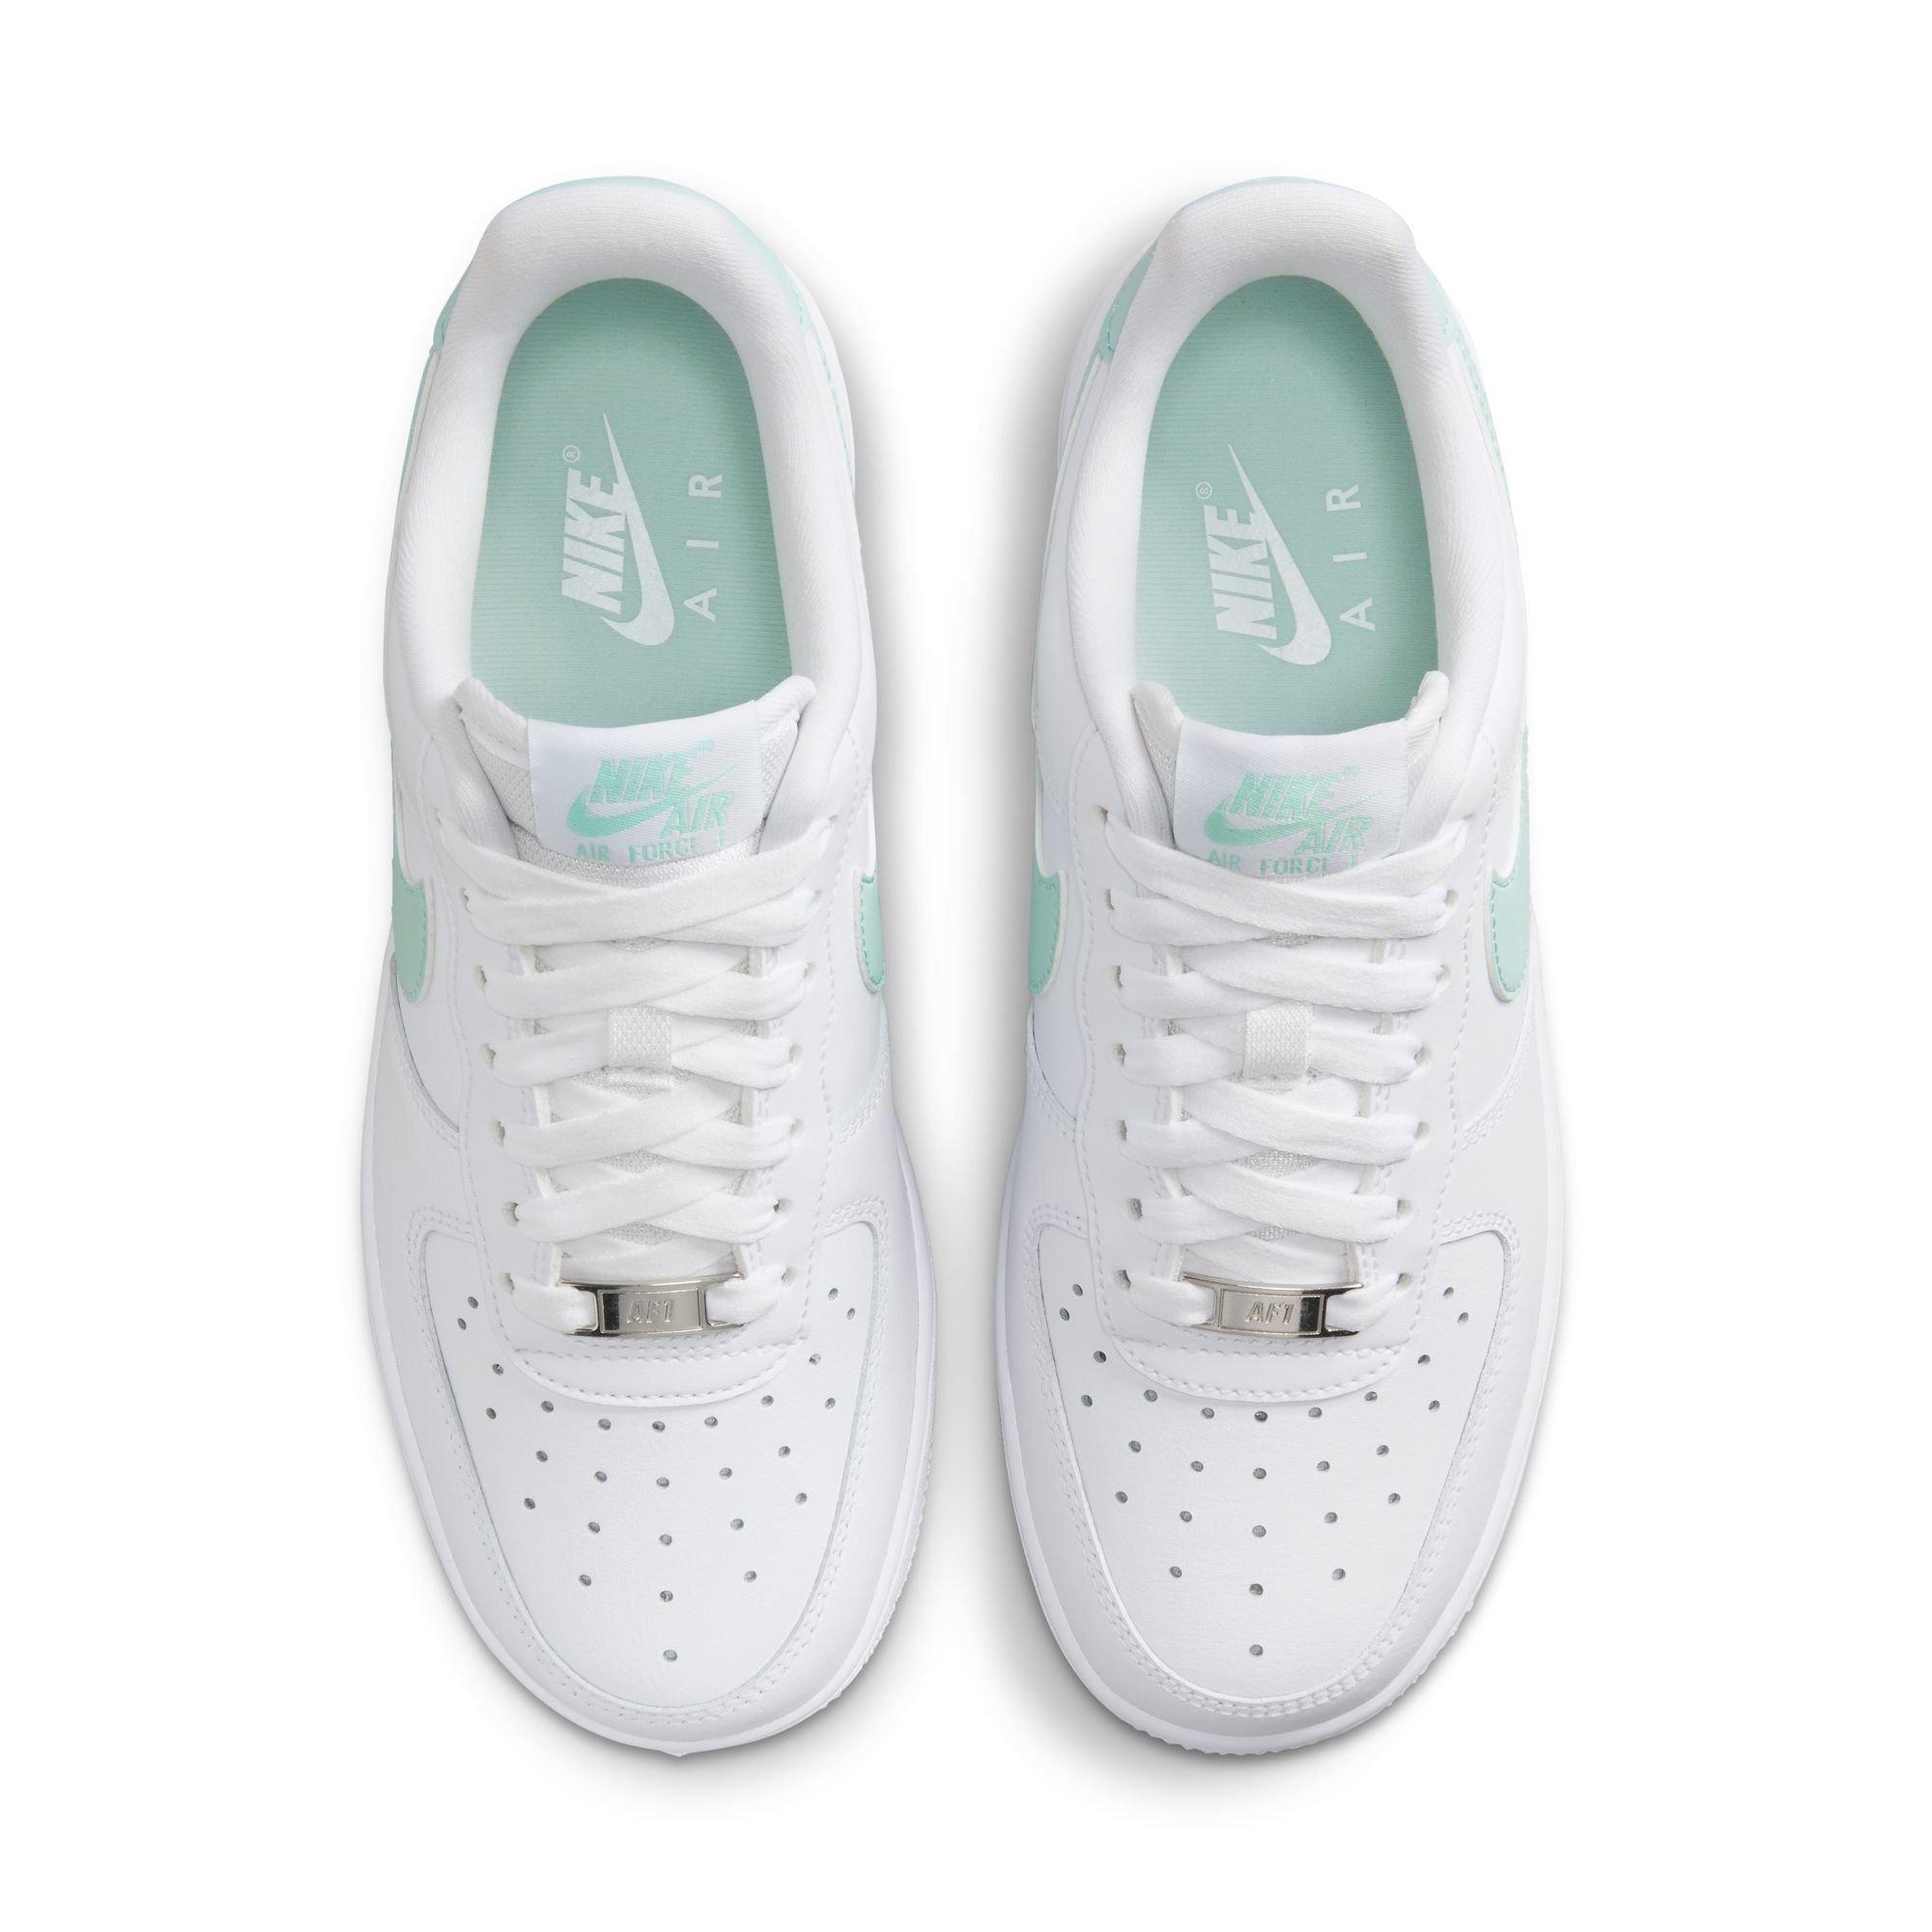 Movilizar Inferir software Nike Air Force 1 Low "White/Jade Ice" Women's Shoe